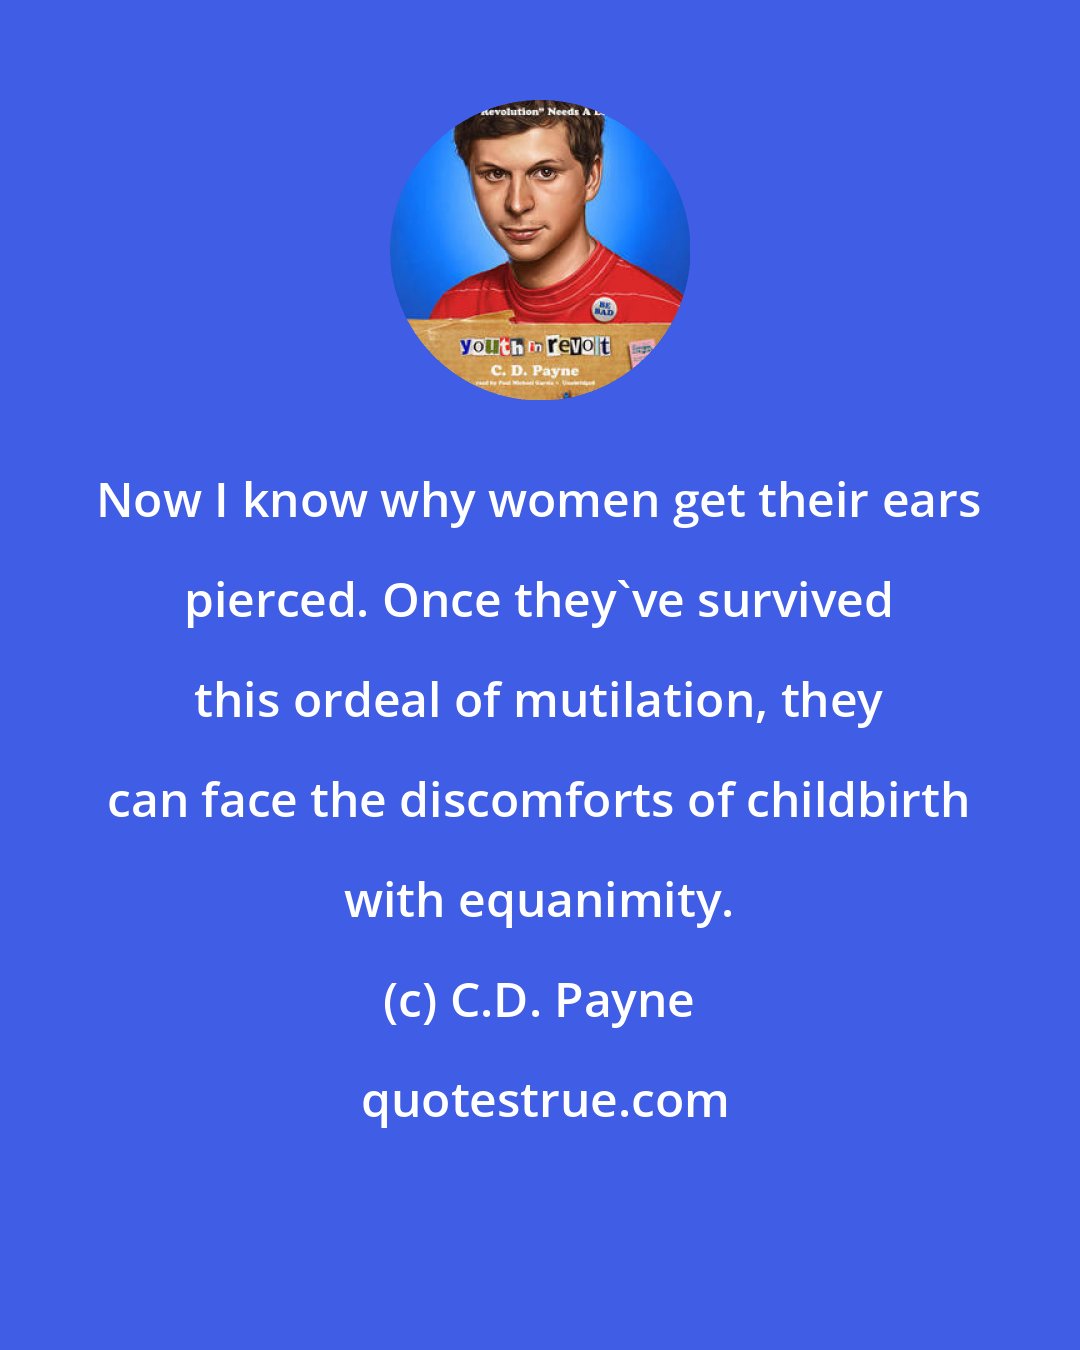 C.D. Payne: Now I know why women get their ears pierced. Once they've survived this ordeal of mutilation, they can face the discomforts of childbirth with equanimity.